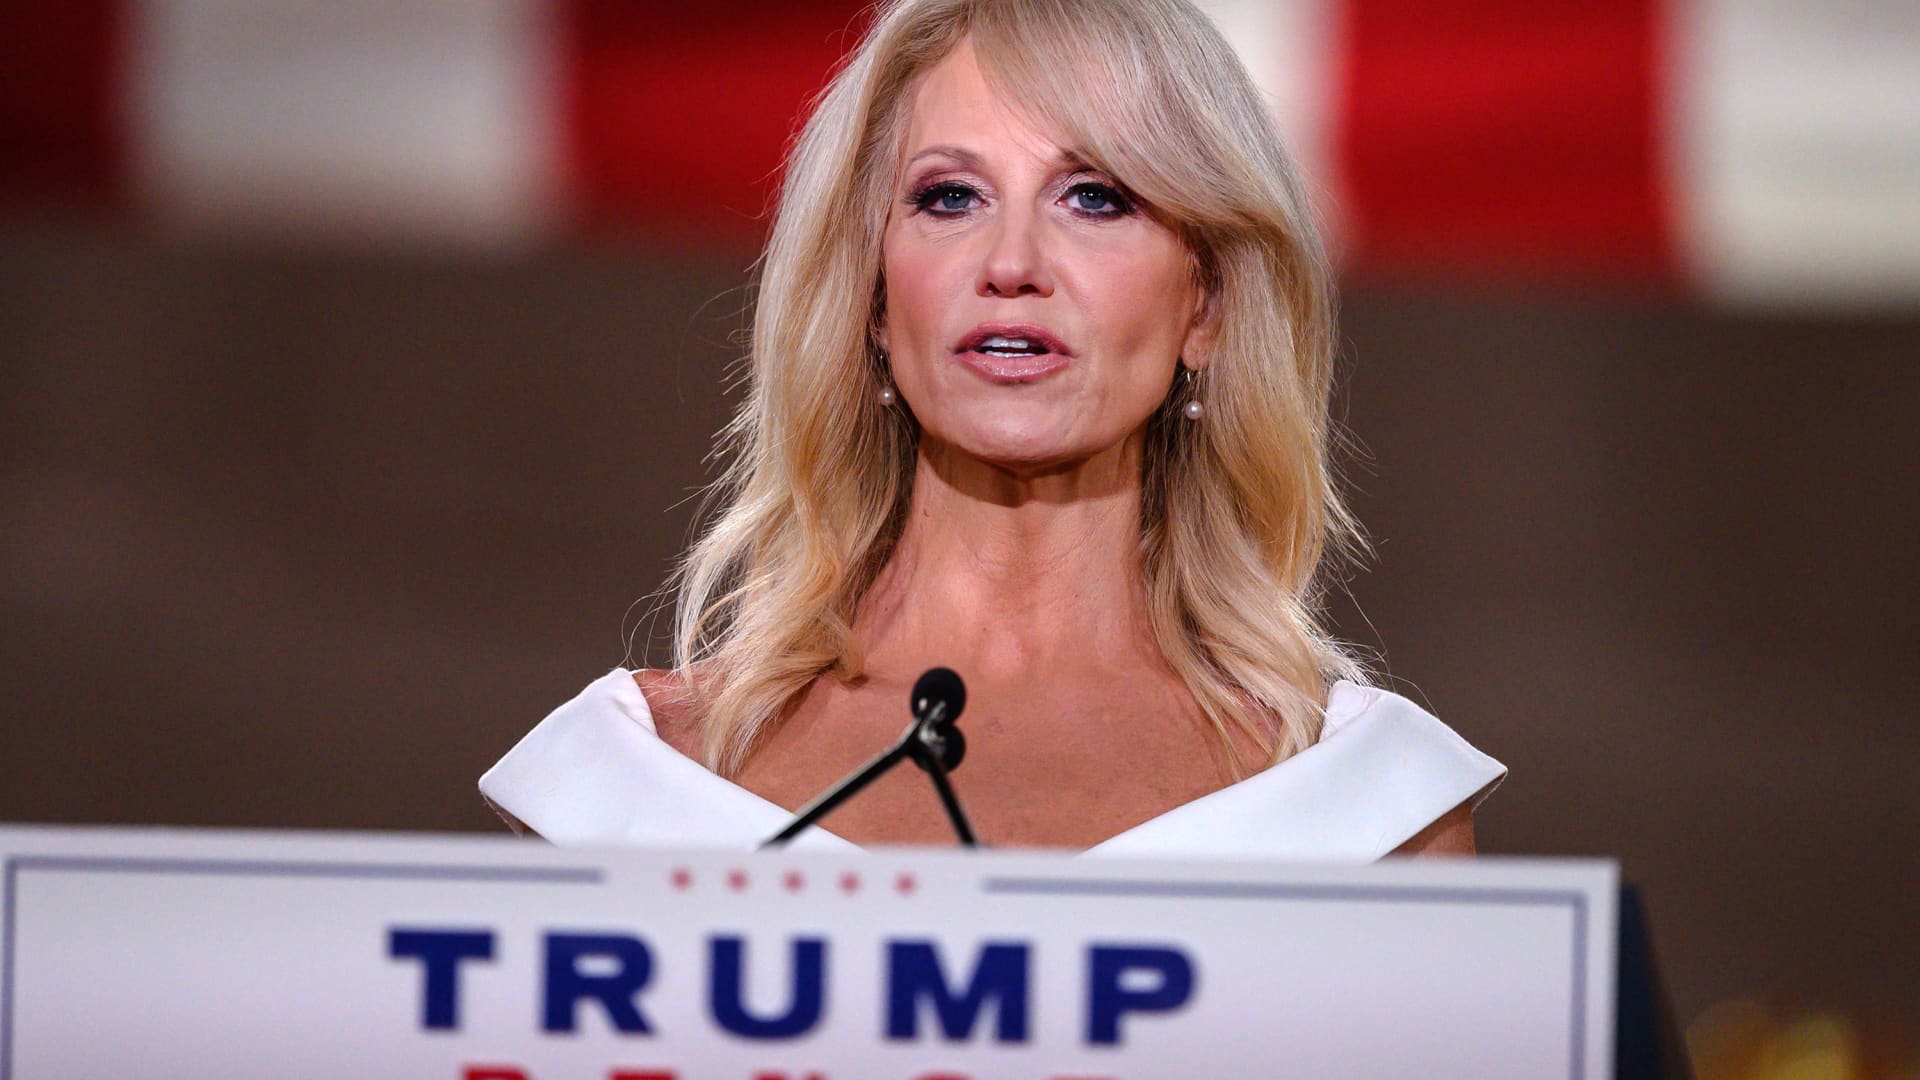 Current Status: Trump's former top aide Kellyanne Conway deposed for hours by Jan. 6 committee